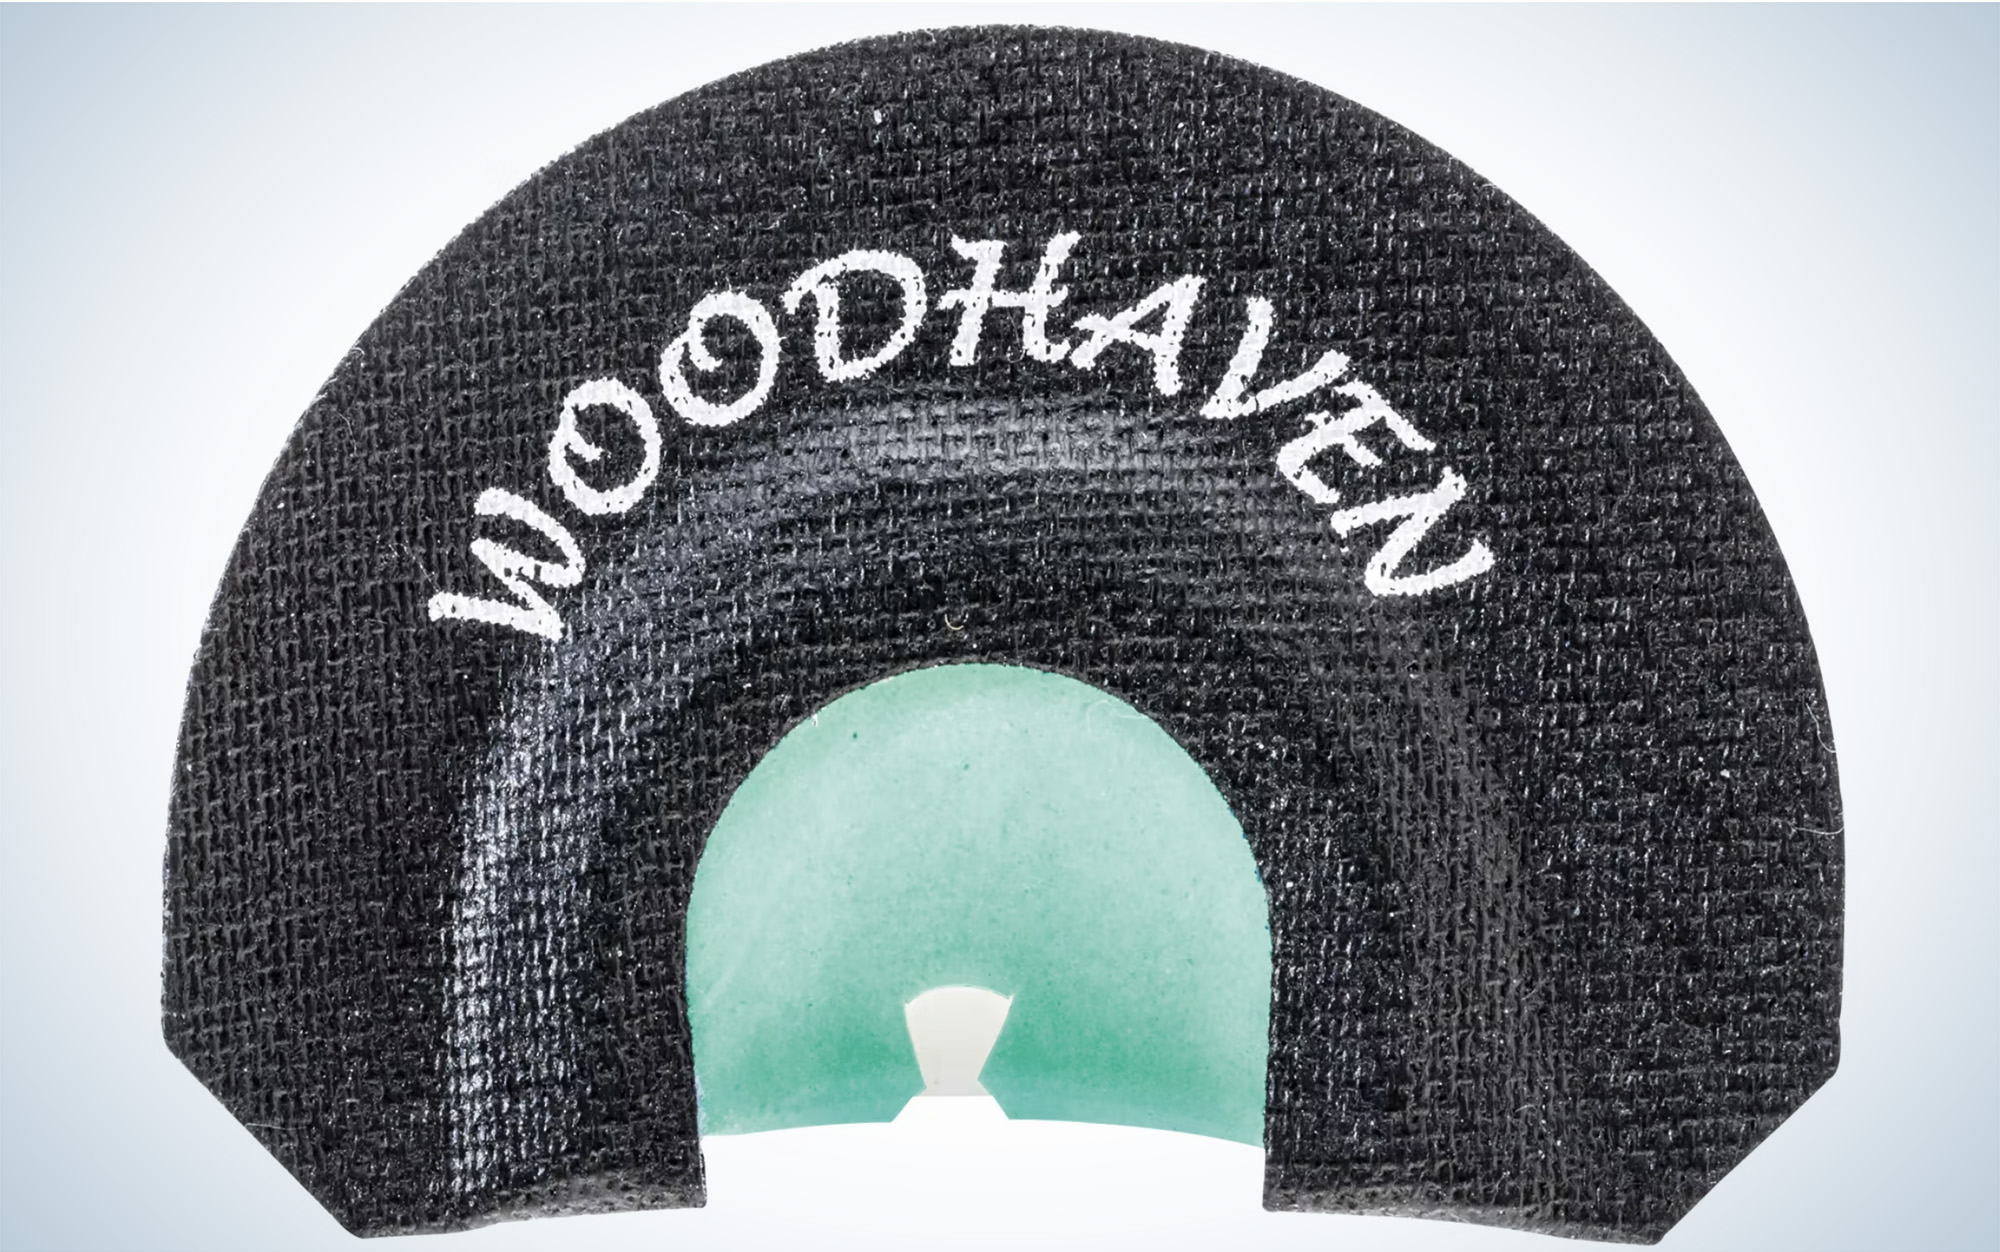 The WoodHaven Ninja Ghost Cut is one of the best calls for turkey hunting.